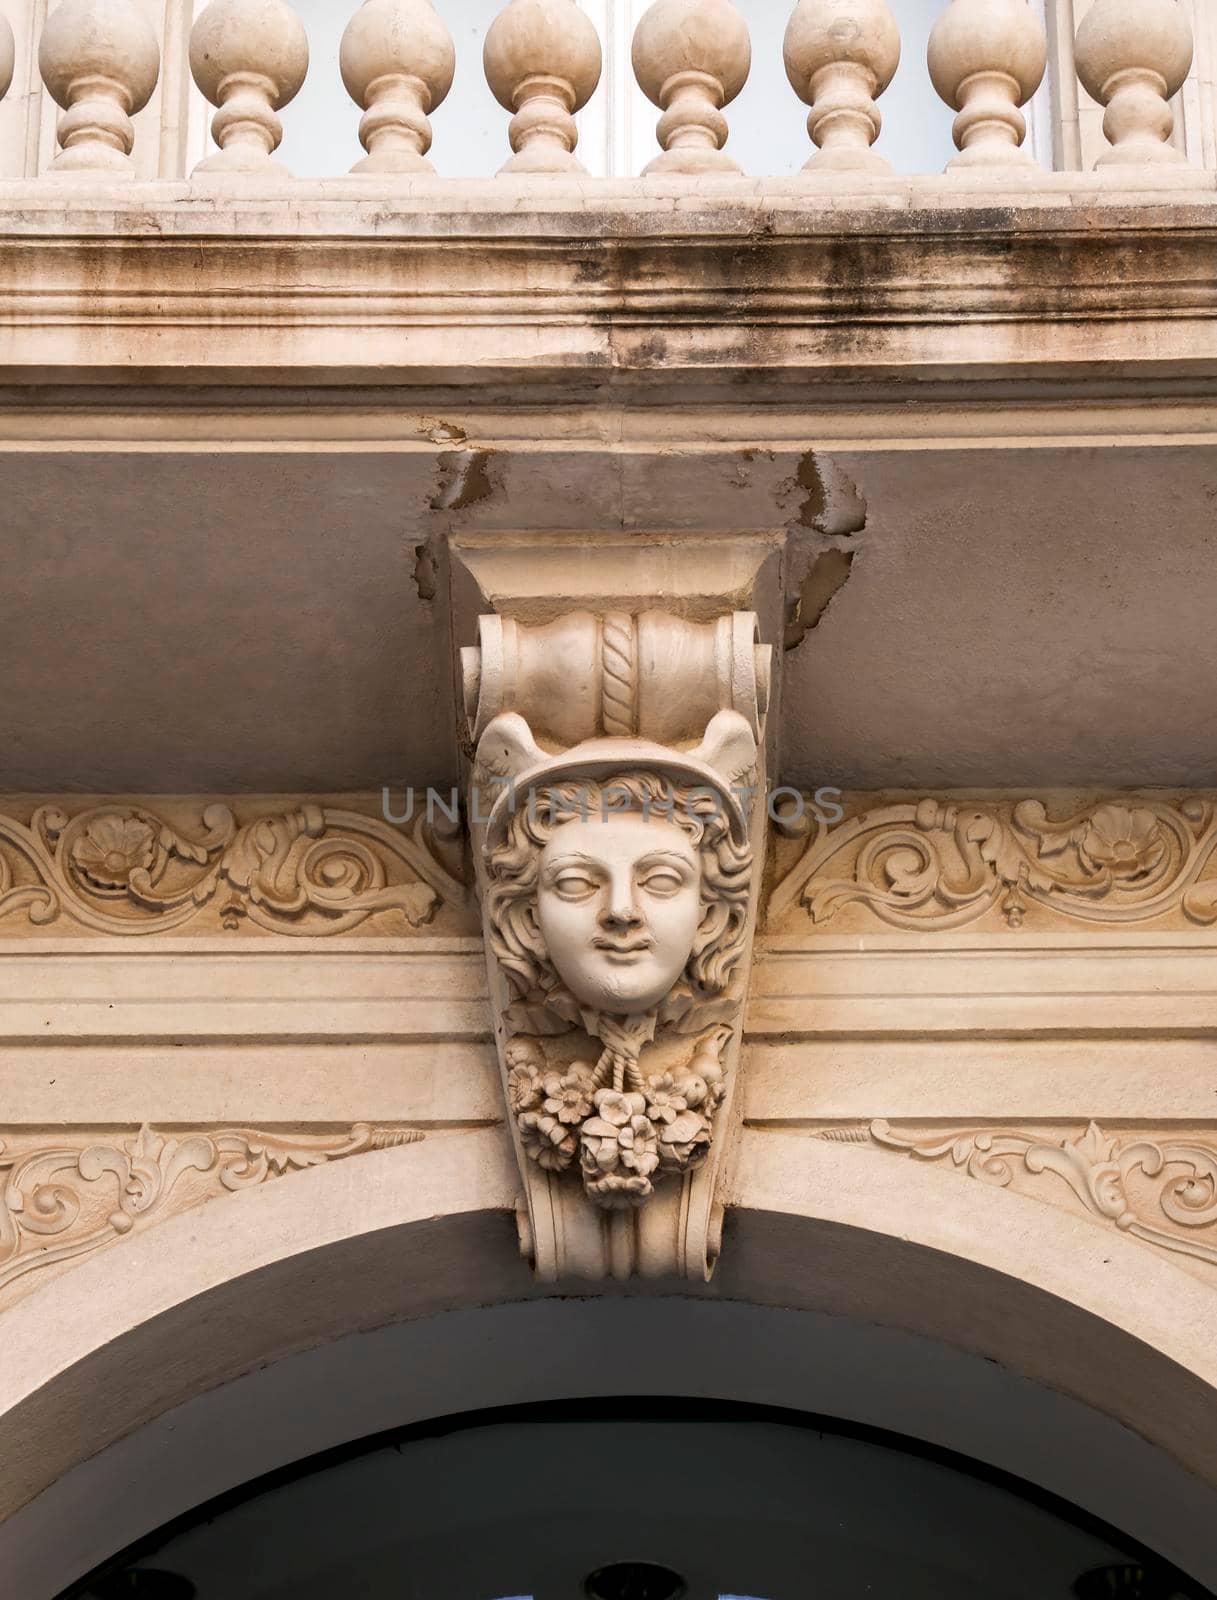 Carved stone woman face on a facade of modernist building in Cartagena, Spain